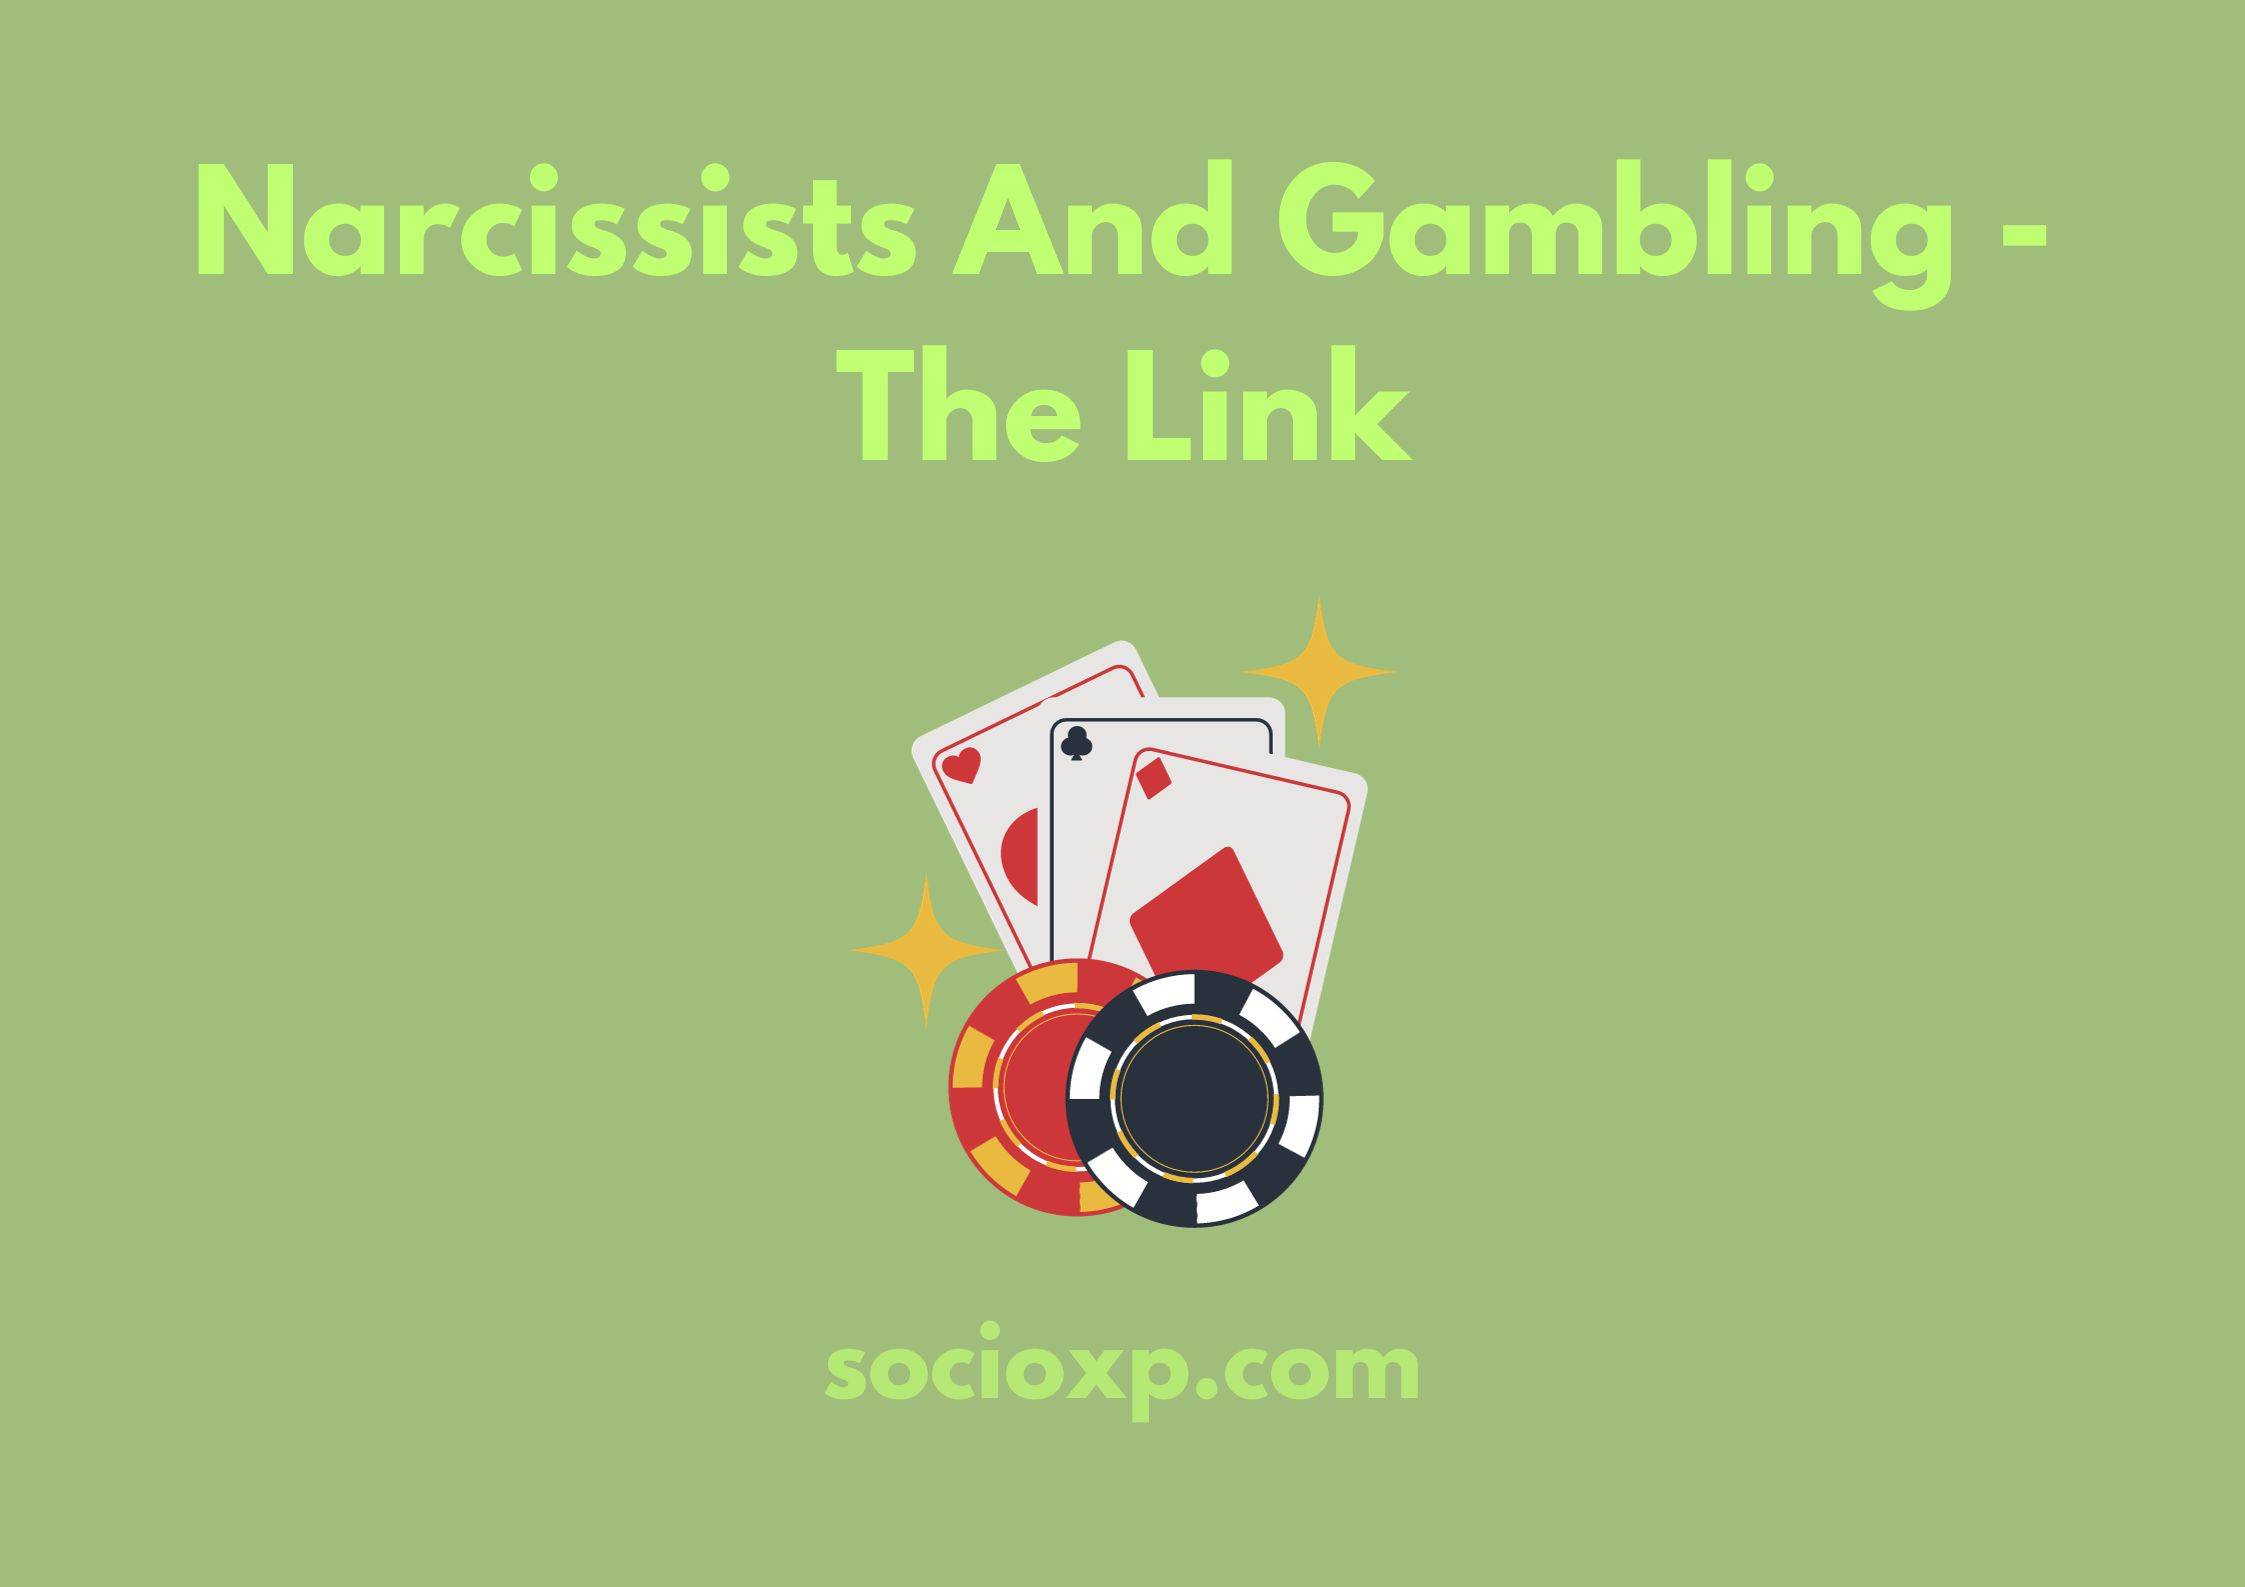 Narcissists And Gambling - The Link